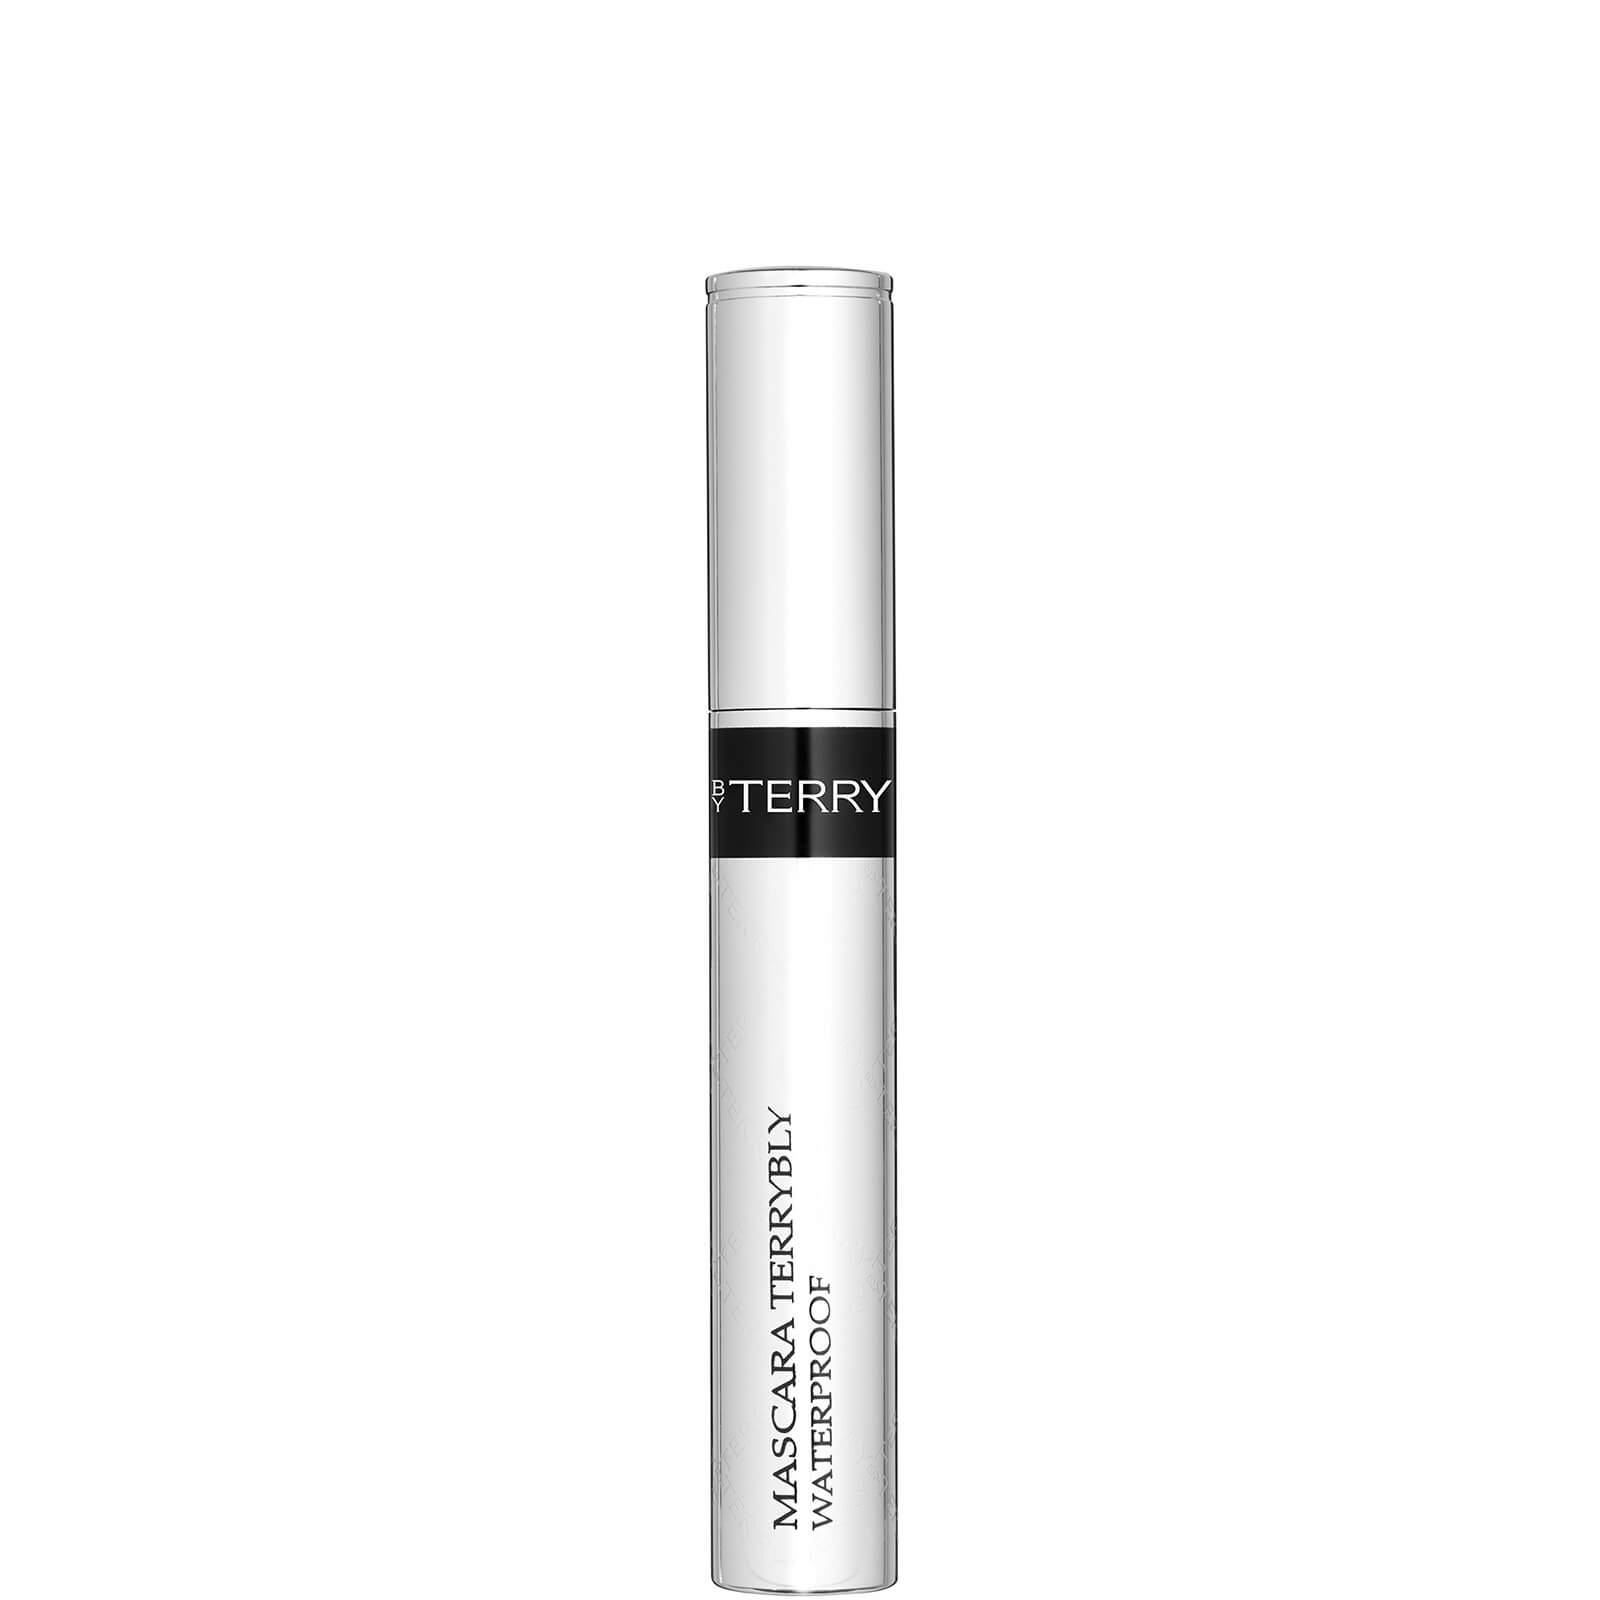 By Terry Terrybly Waterproof Mascara - Black 8g